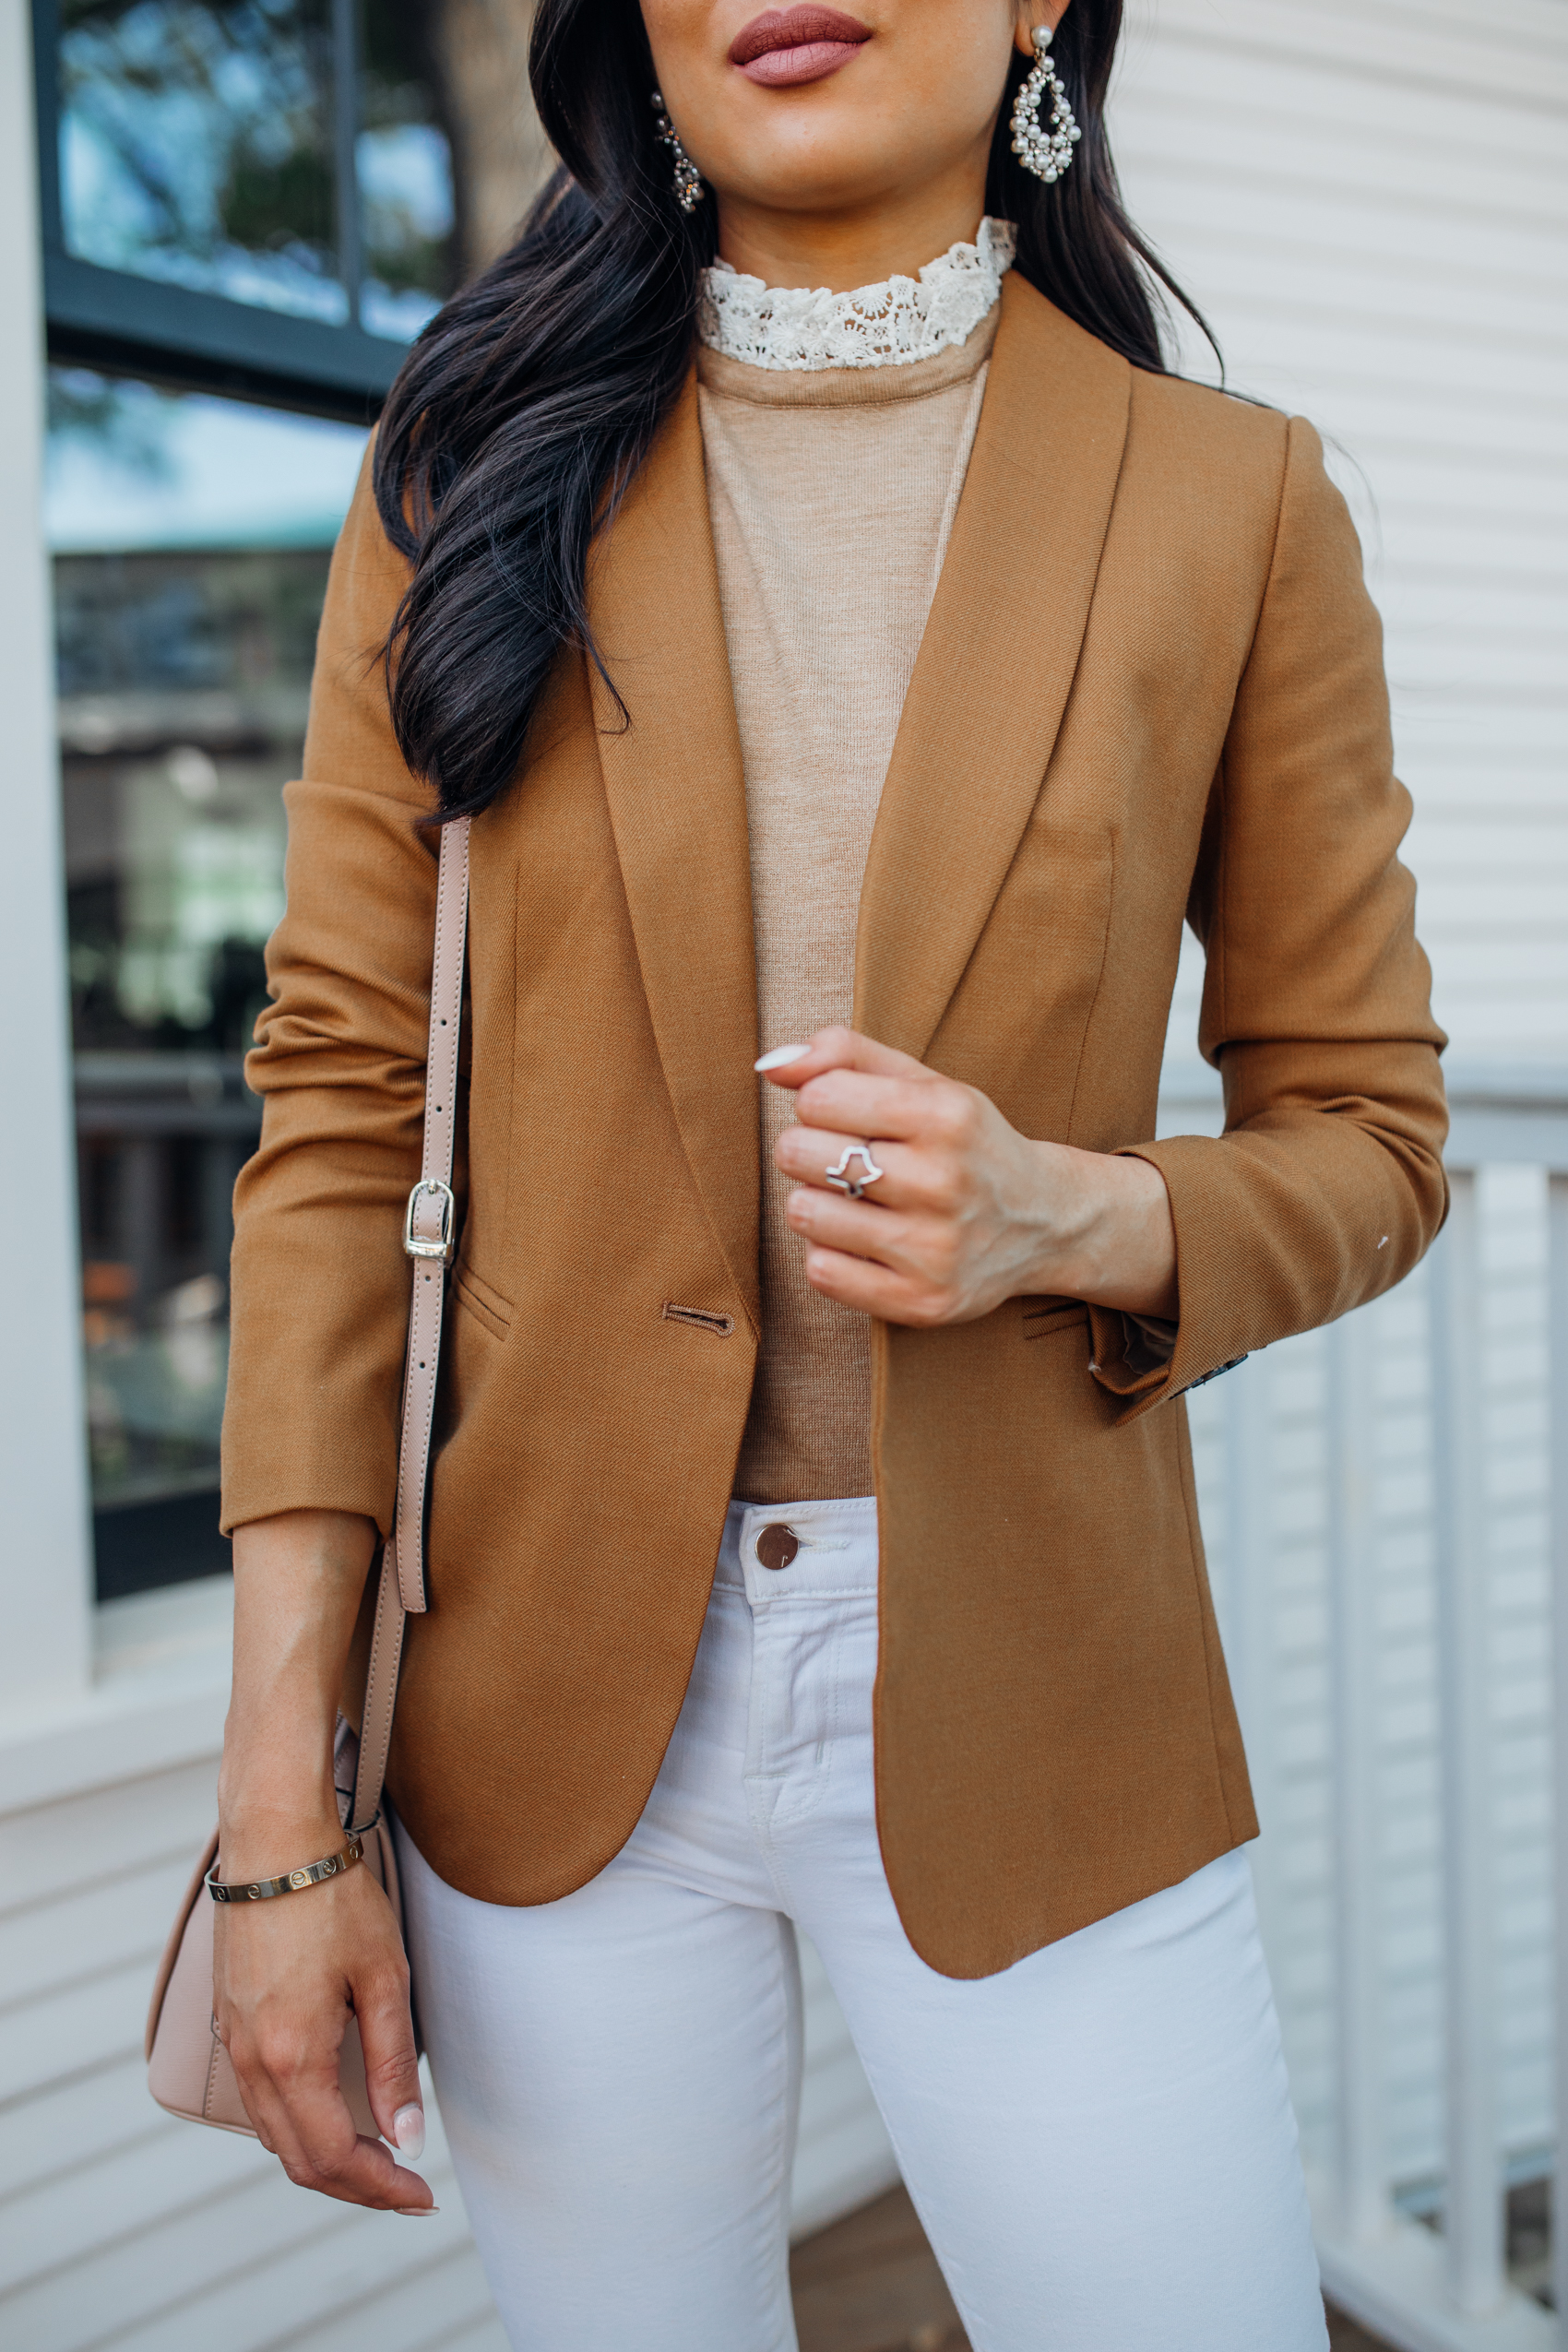 Brown wool blazer outfits with lace collar sweater for business casual